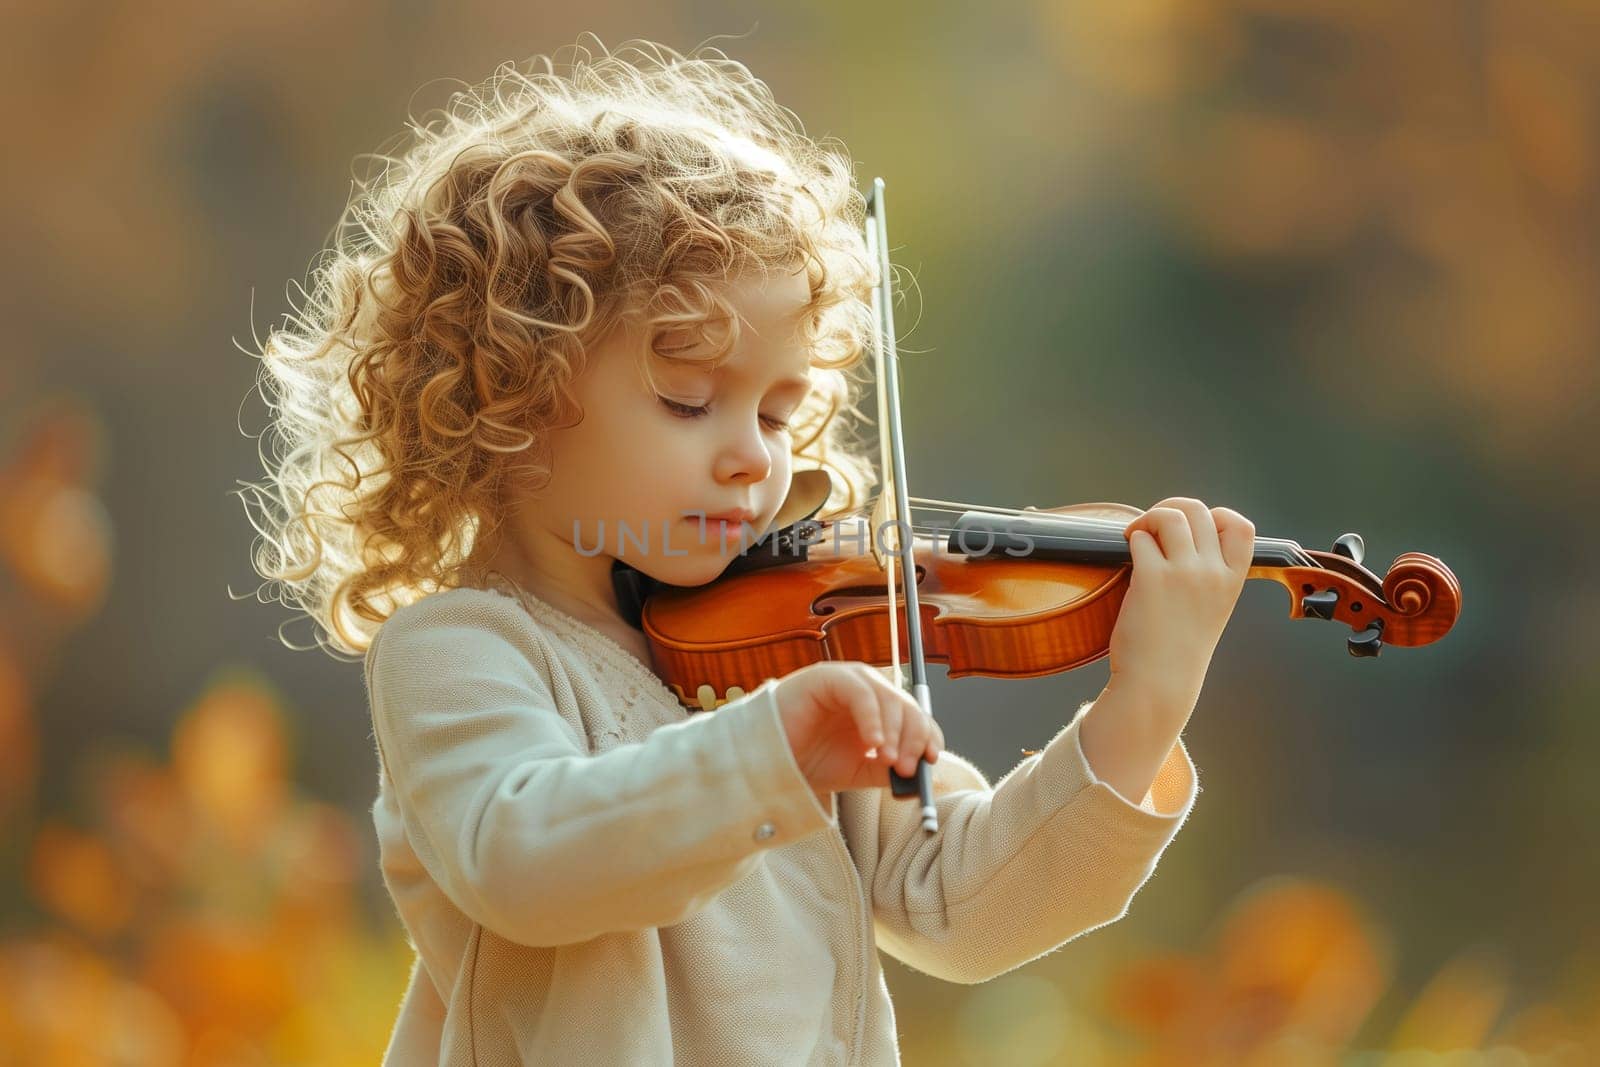 Child little girl playing music on the violin, creativity, hobby by Rohappy